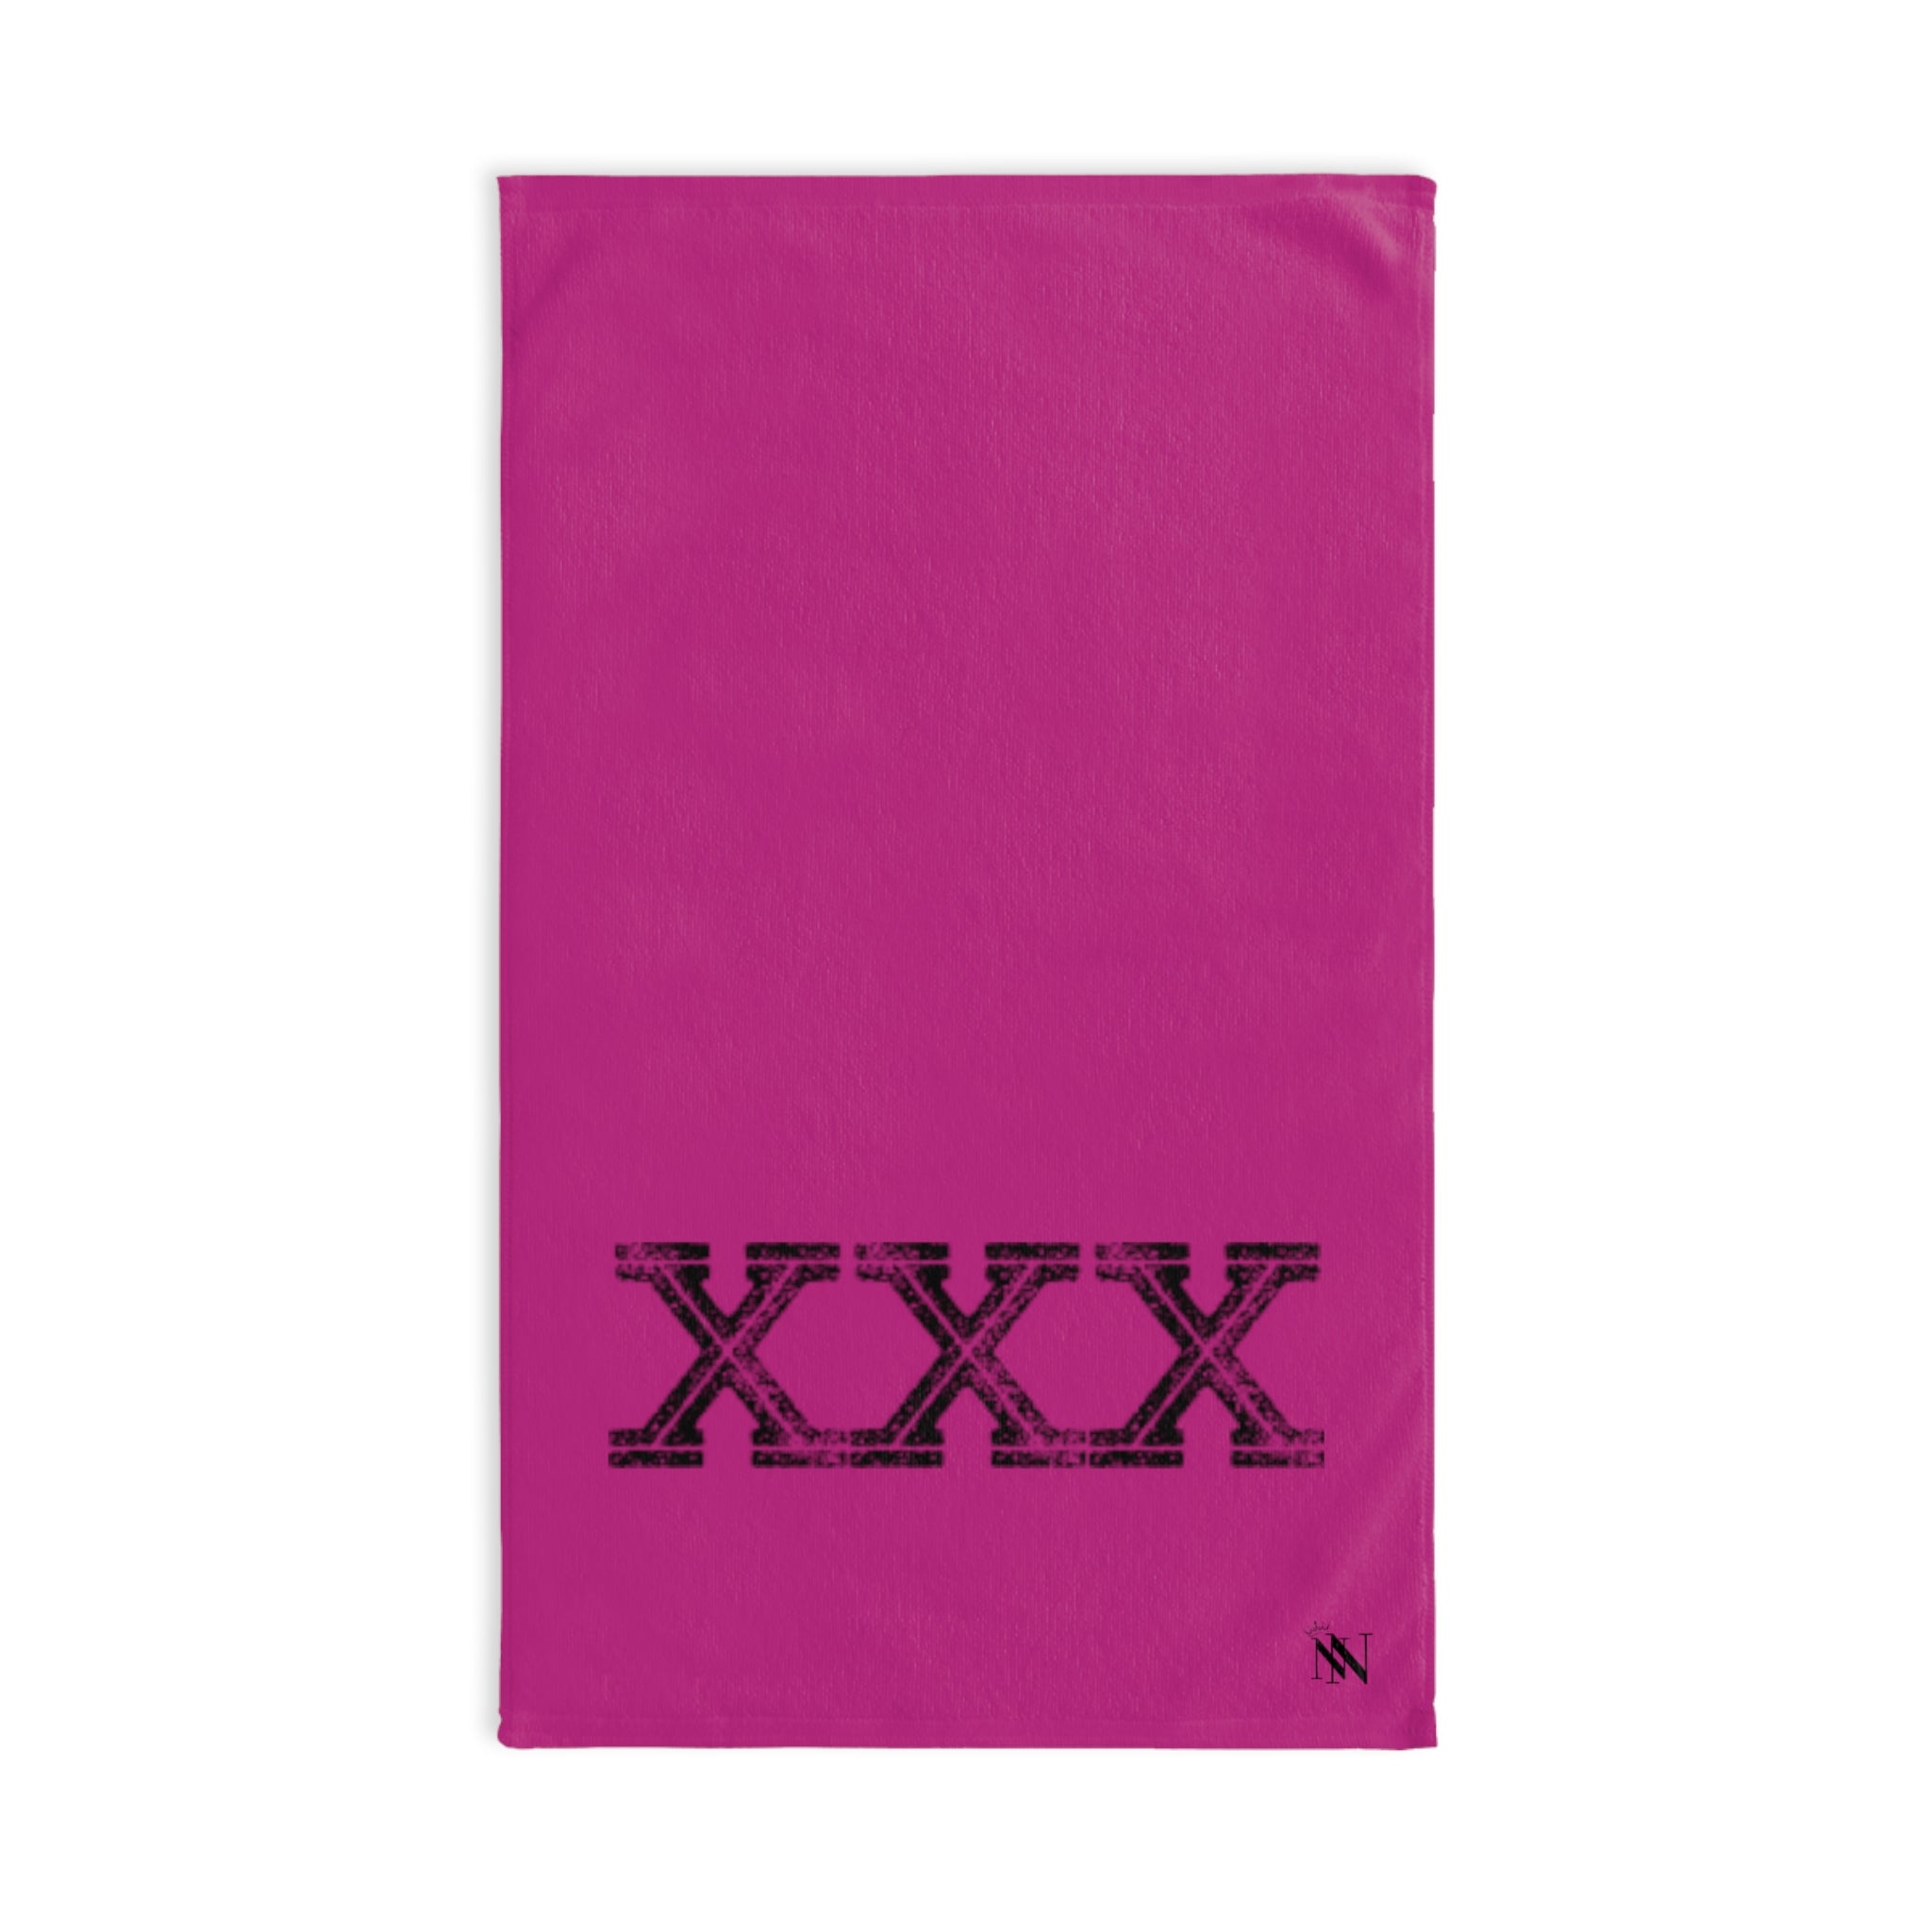 BLK XXX Triple Rated Fuscia | Funny Gifts for Men - Gifts for Him - Birthday Gifts for Men, Him, Husband, Boyfriend, New Couple Gifts, Fathers & Valentines Day Gifts, Hand Towels NECTAR NAPKINS